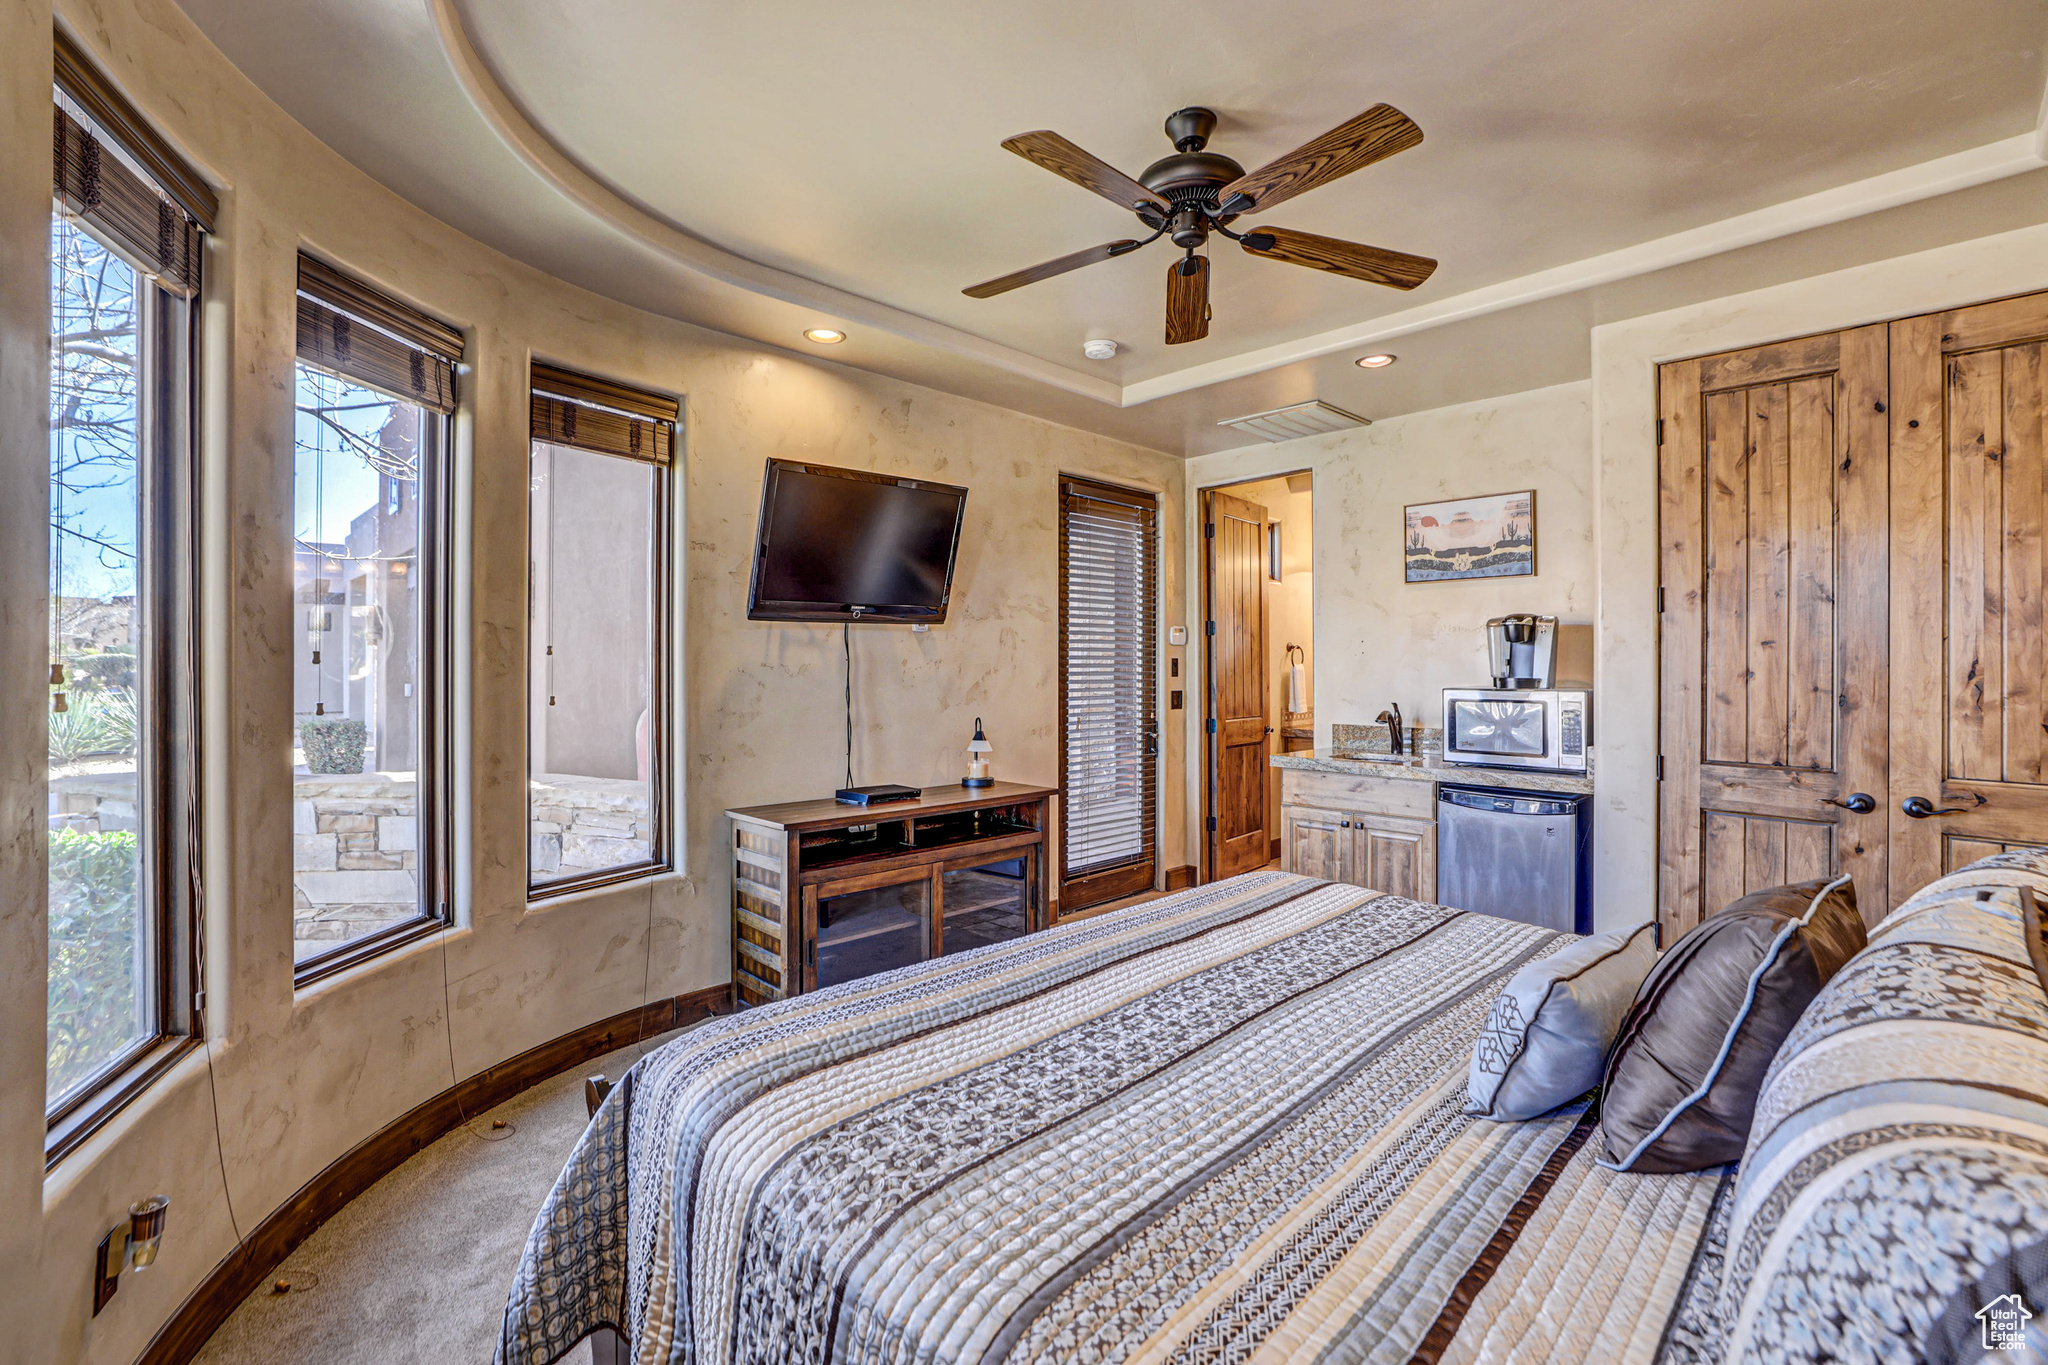 Bedroom featuring multiple windows, carpet floors, a tray ceiling, and ceiling fan